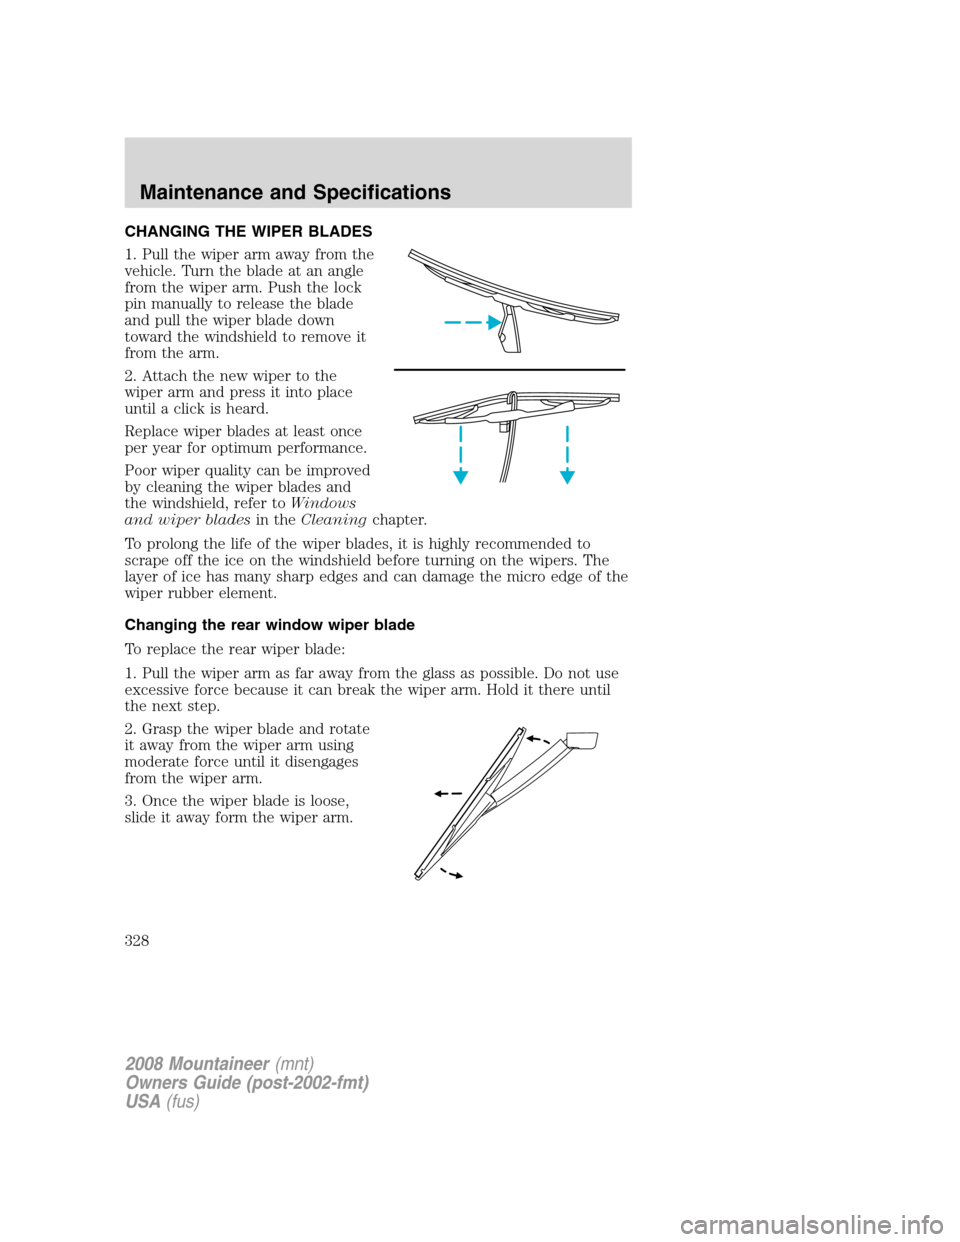 Mercury Mountaineer 2008  Owners Manuals CHANGING THE WIPER BLADES
1. Pull the wiper arm away from the
vehicle. Turn the blade at an angle
from the wiper arm. Push the lock
pin manually to release the blade
and pull the wiper blade down
towa